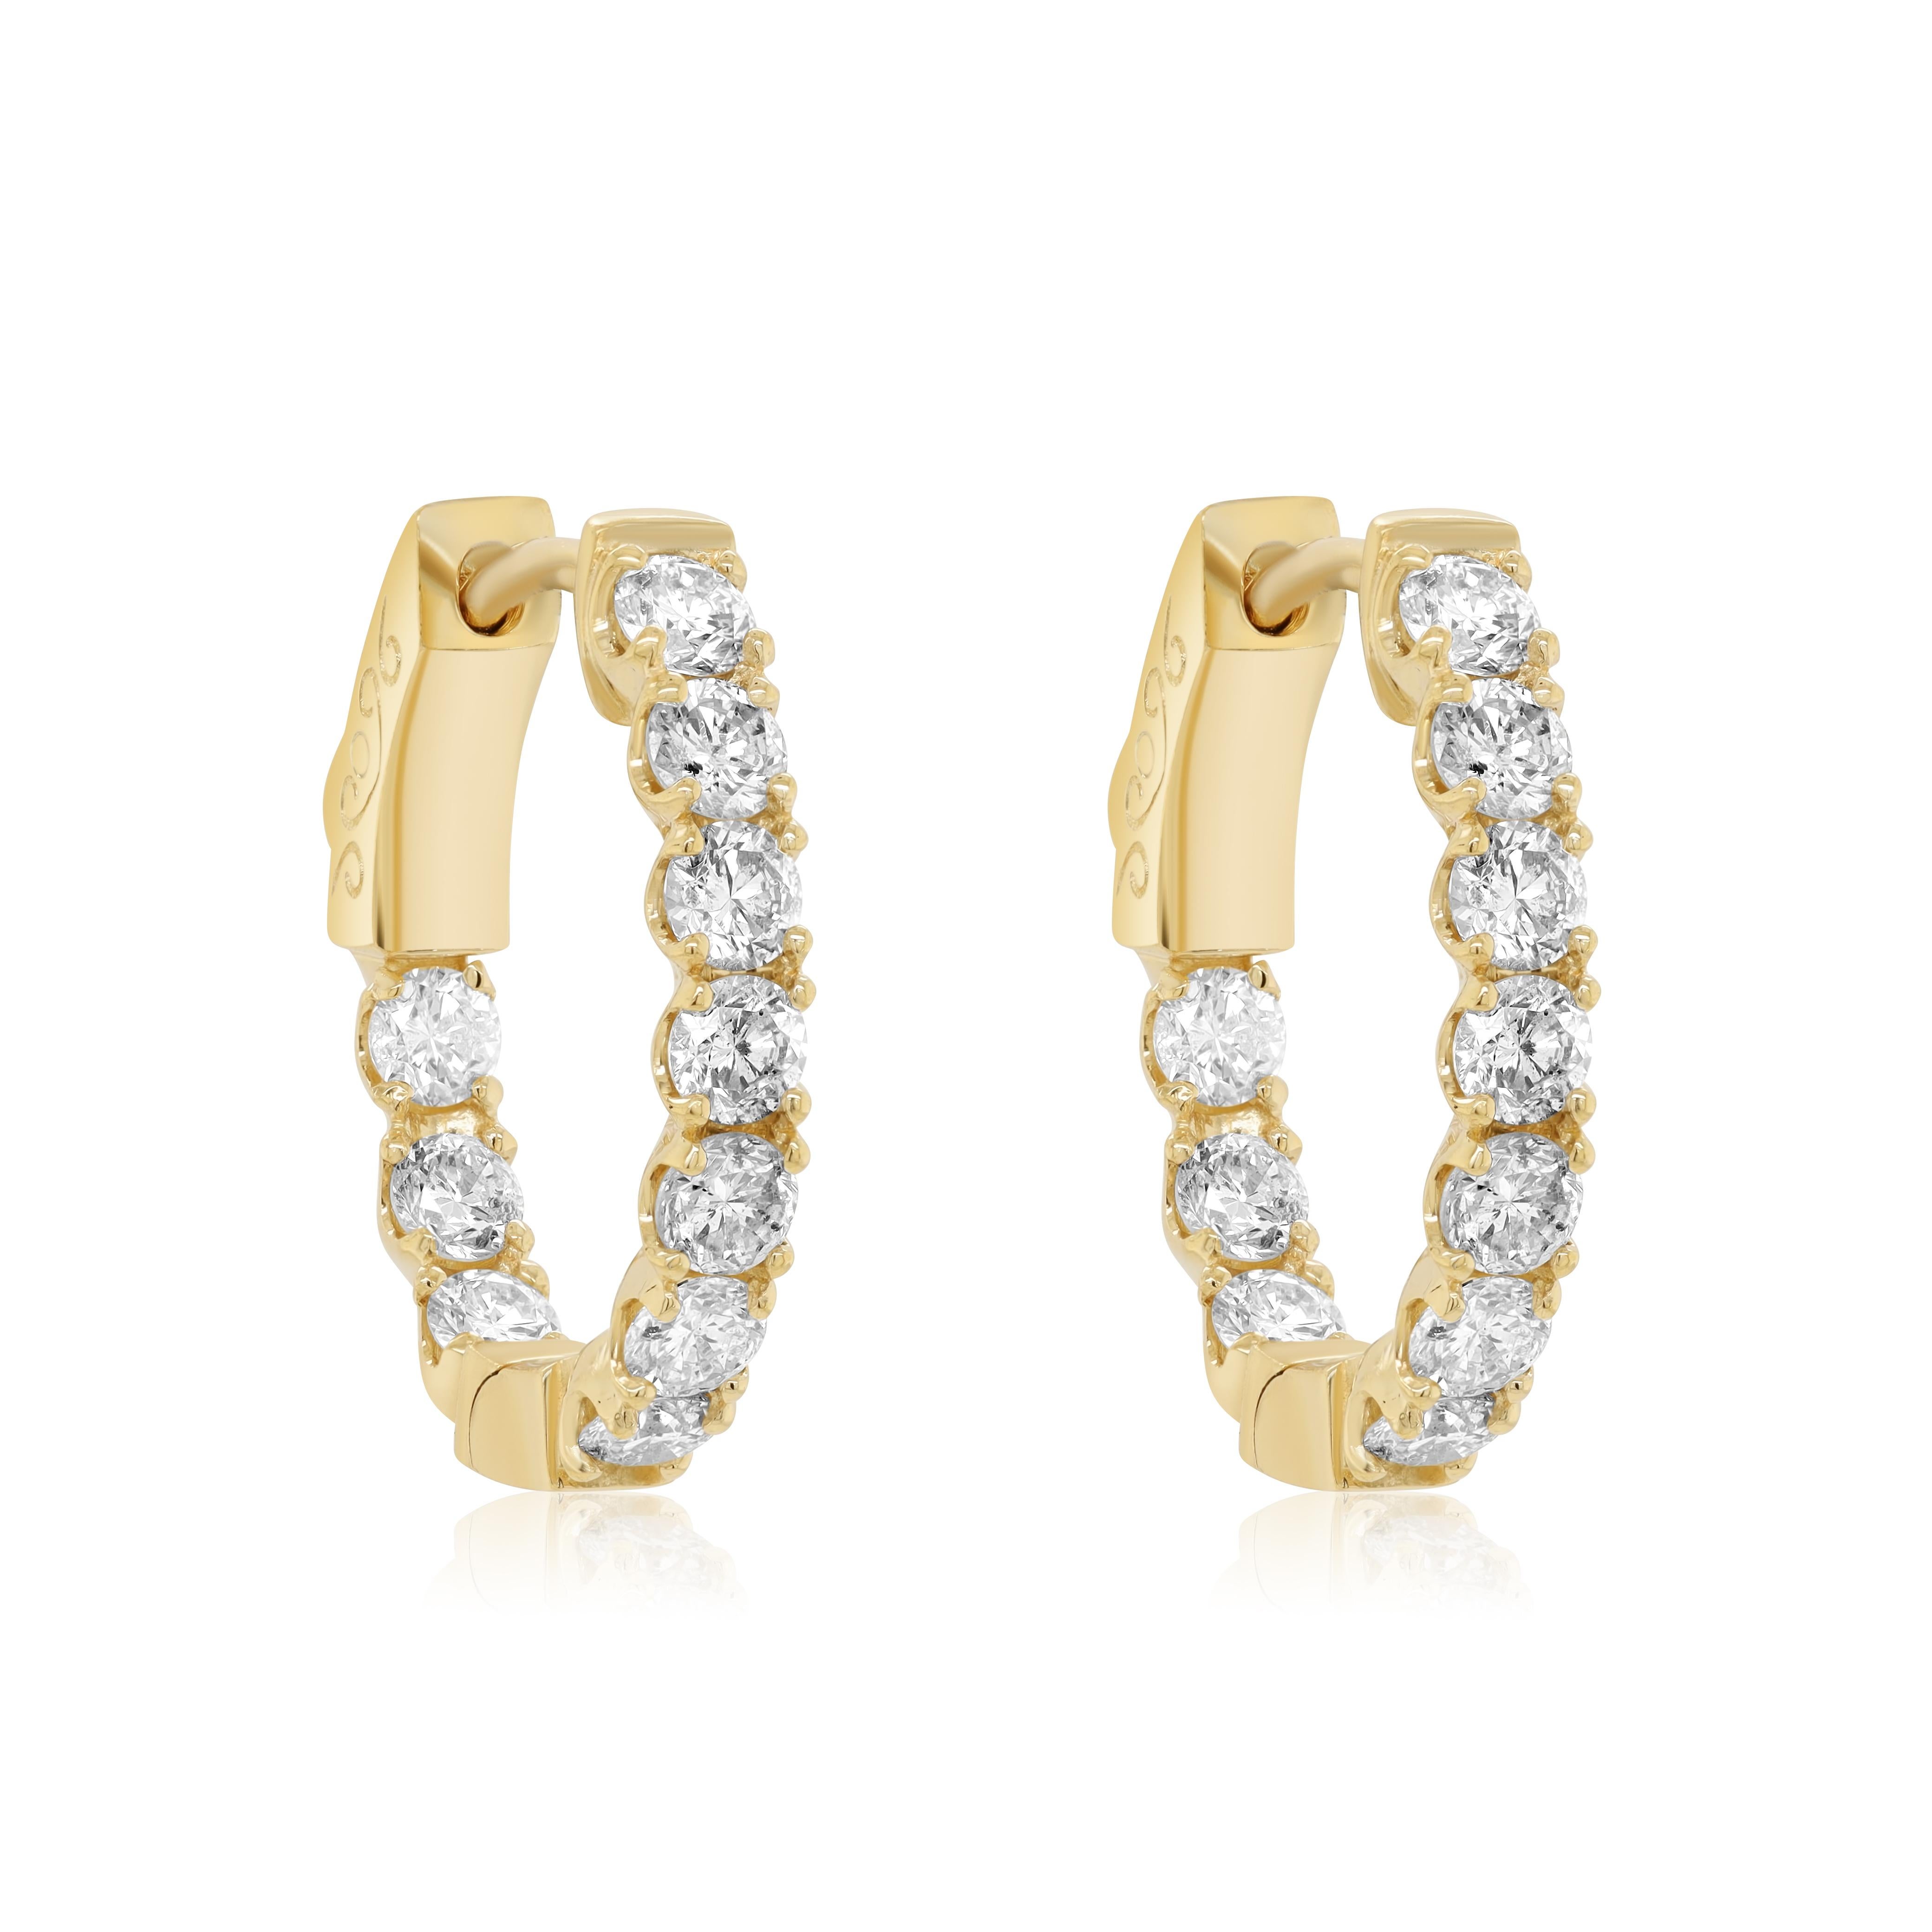 Brilliant Cut Diana M. 14KT YELLOW GOLD, DIAMOND OVAL HOOPS FEATURES 1.65cts OF DIAMONDS.  For Sale